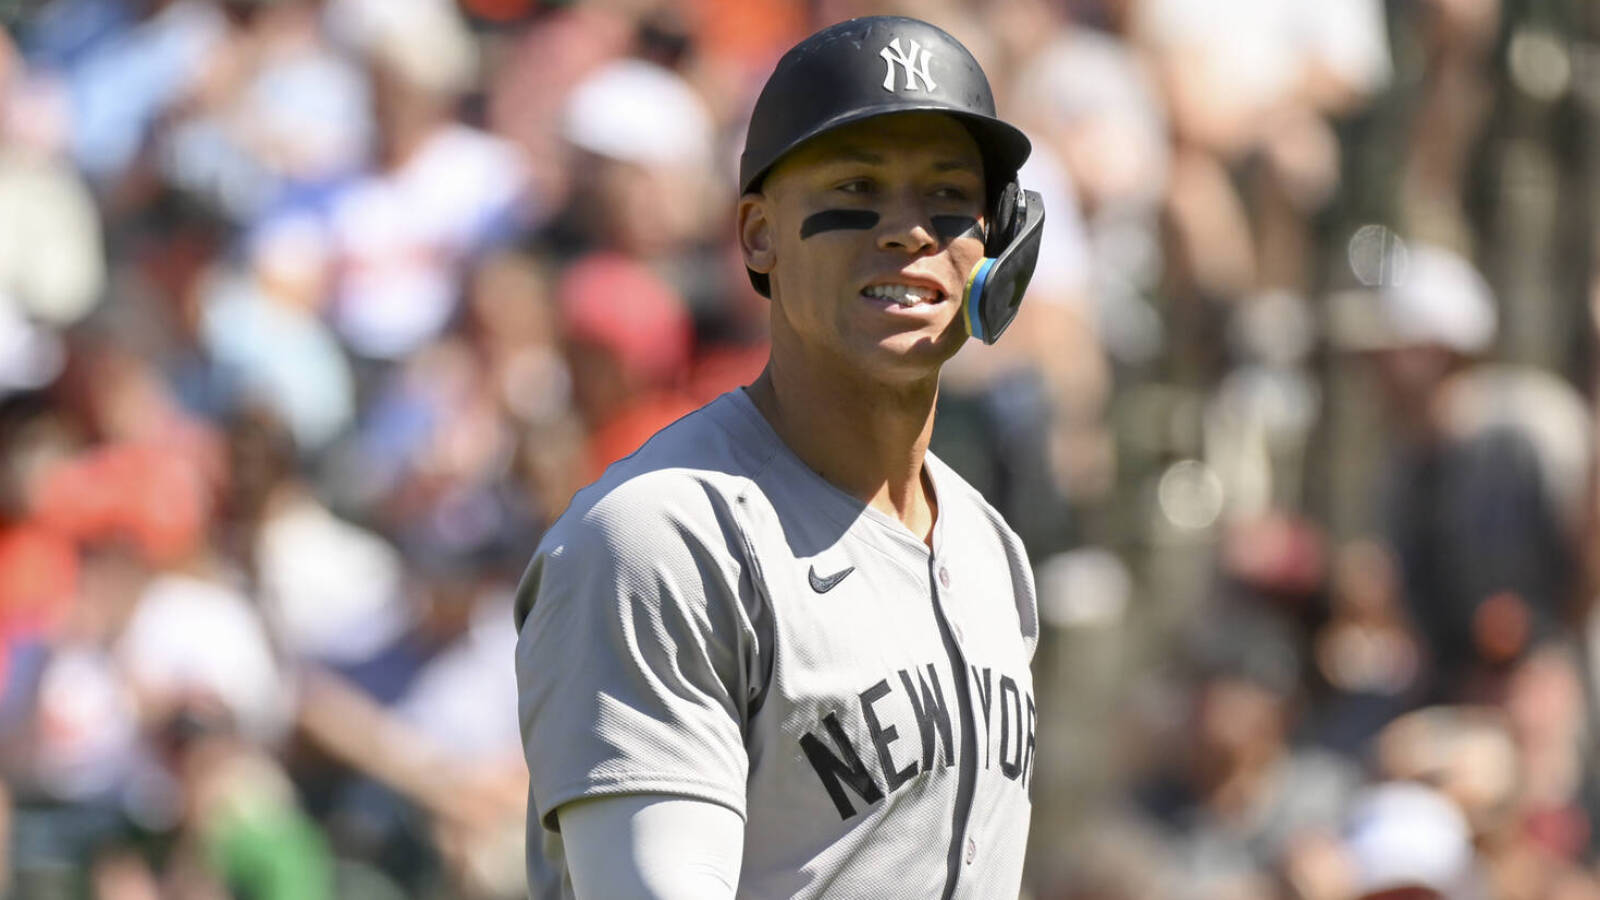 Yankees' Aaron Judge addresses offensive woes creeping into May